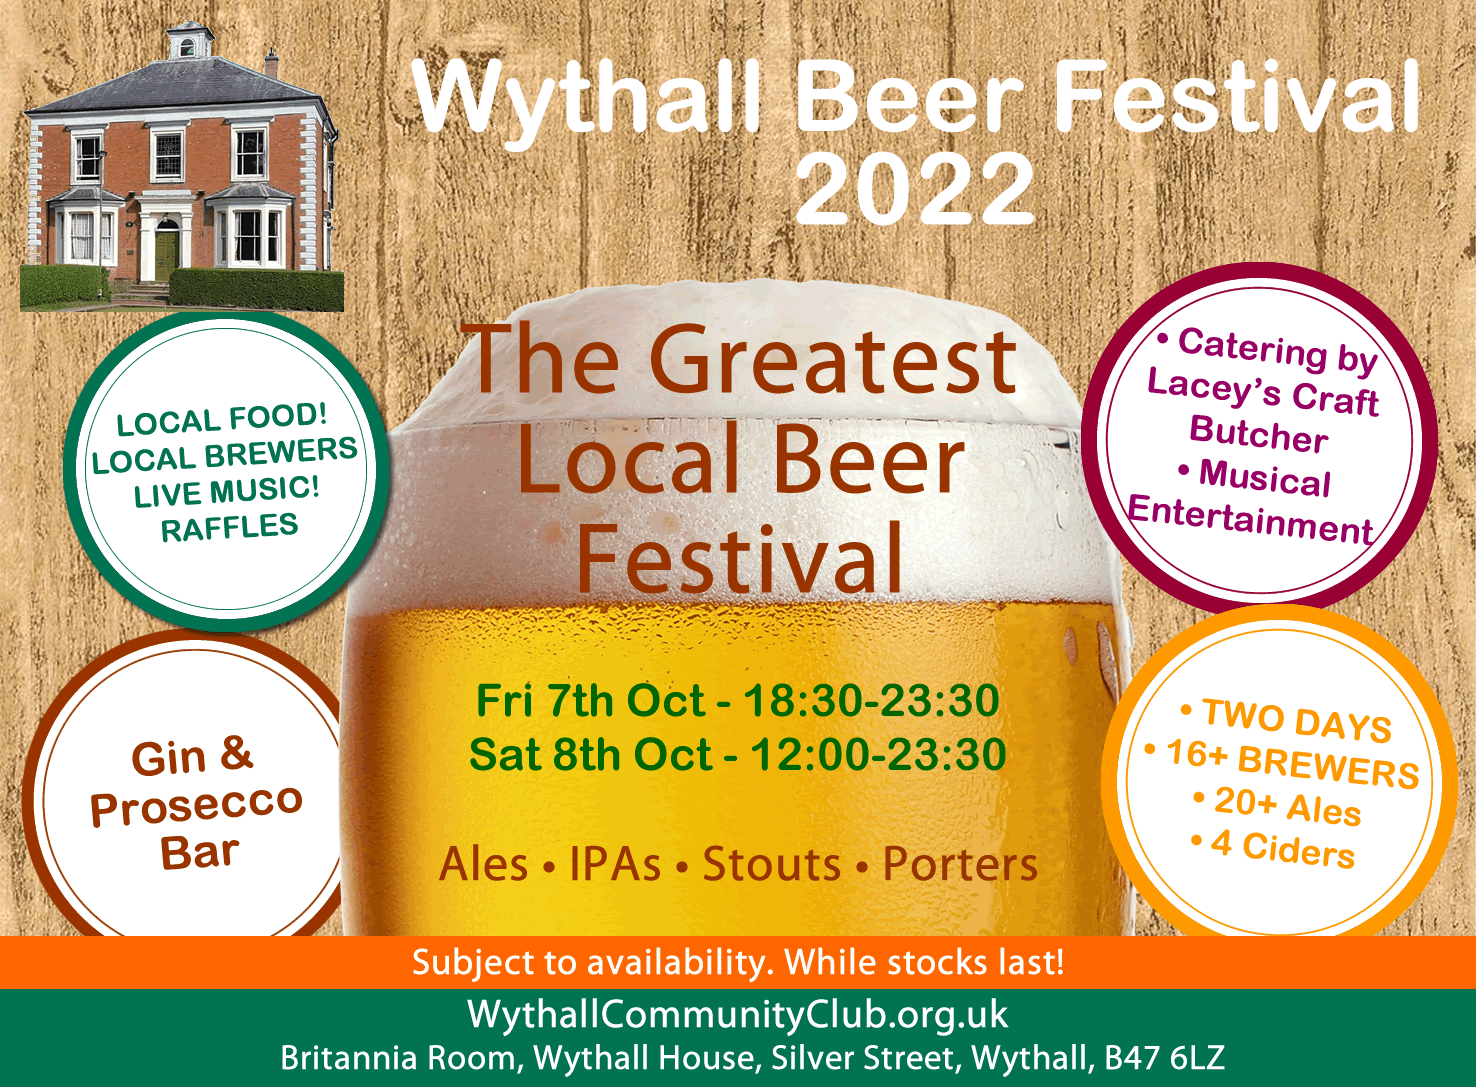 Wythall Beer Festival 2022